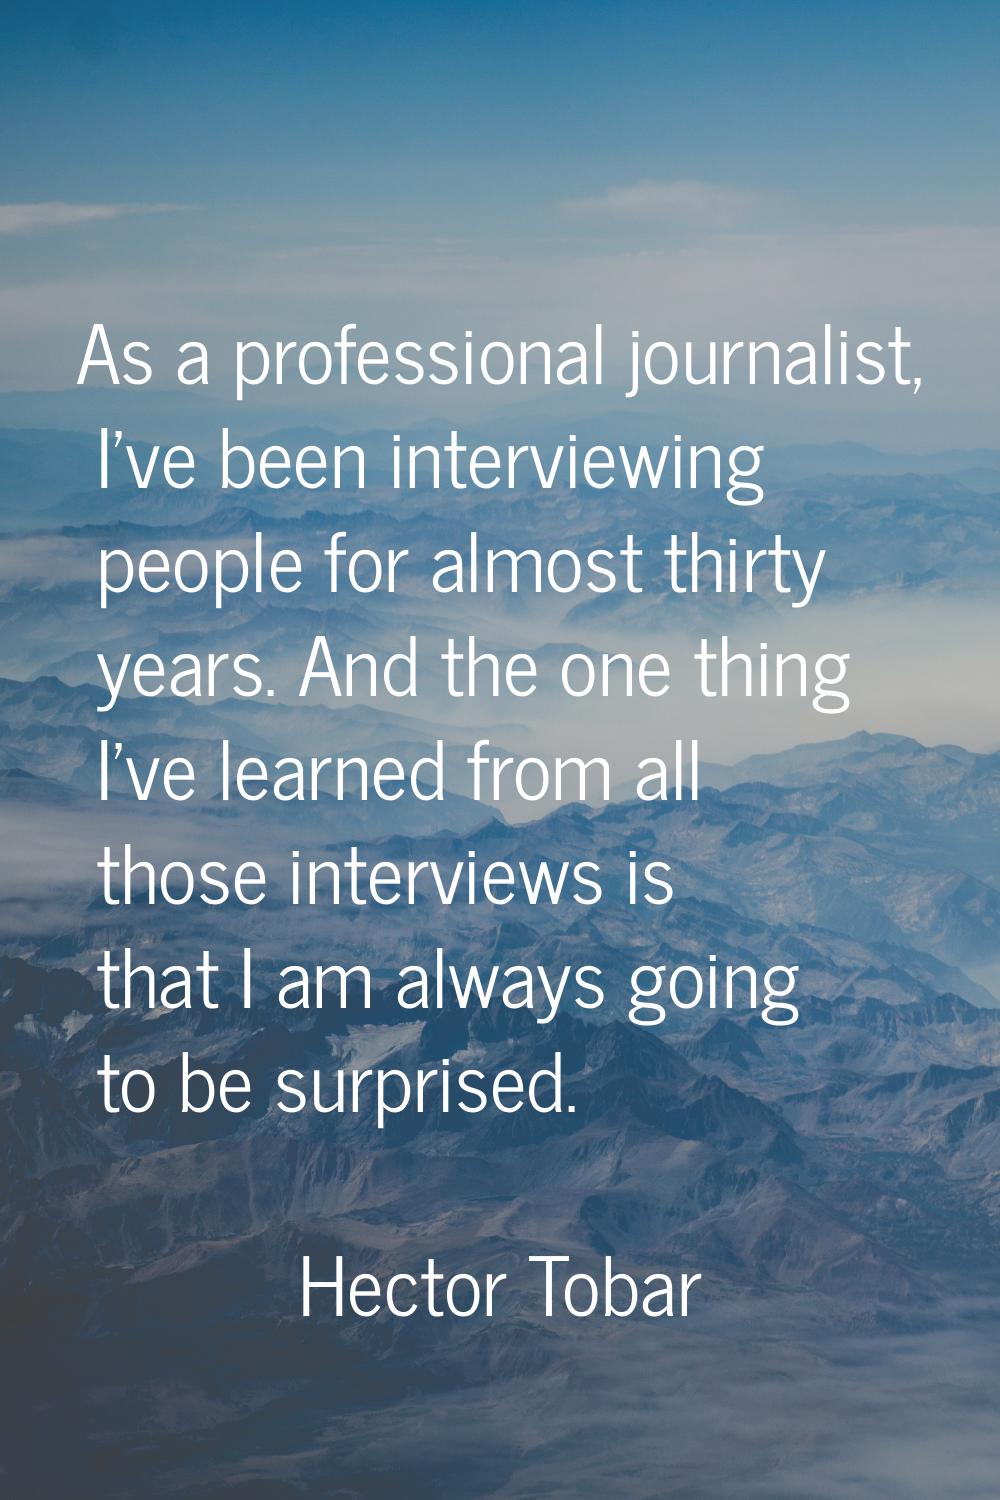 As a professional journalist, I've been interviewing people for almost thirty years. And the one th